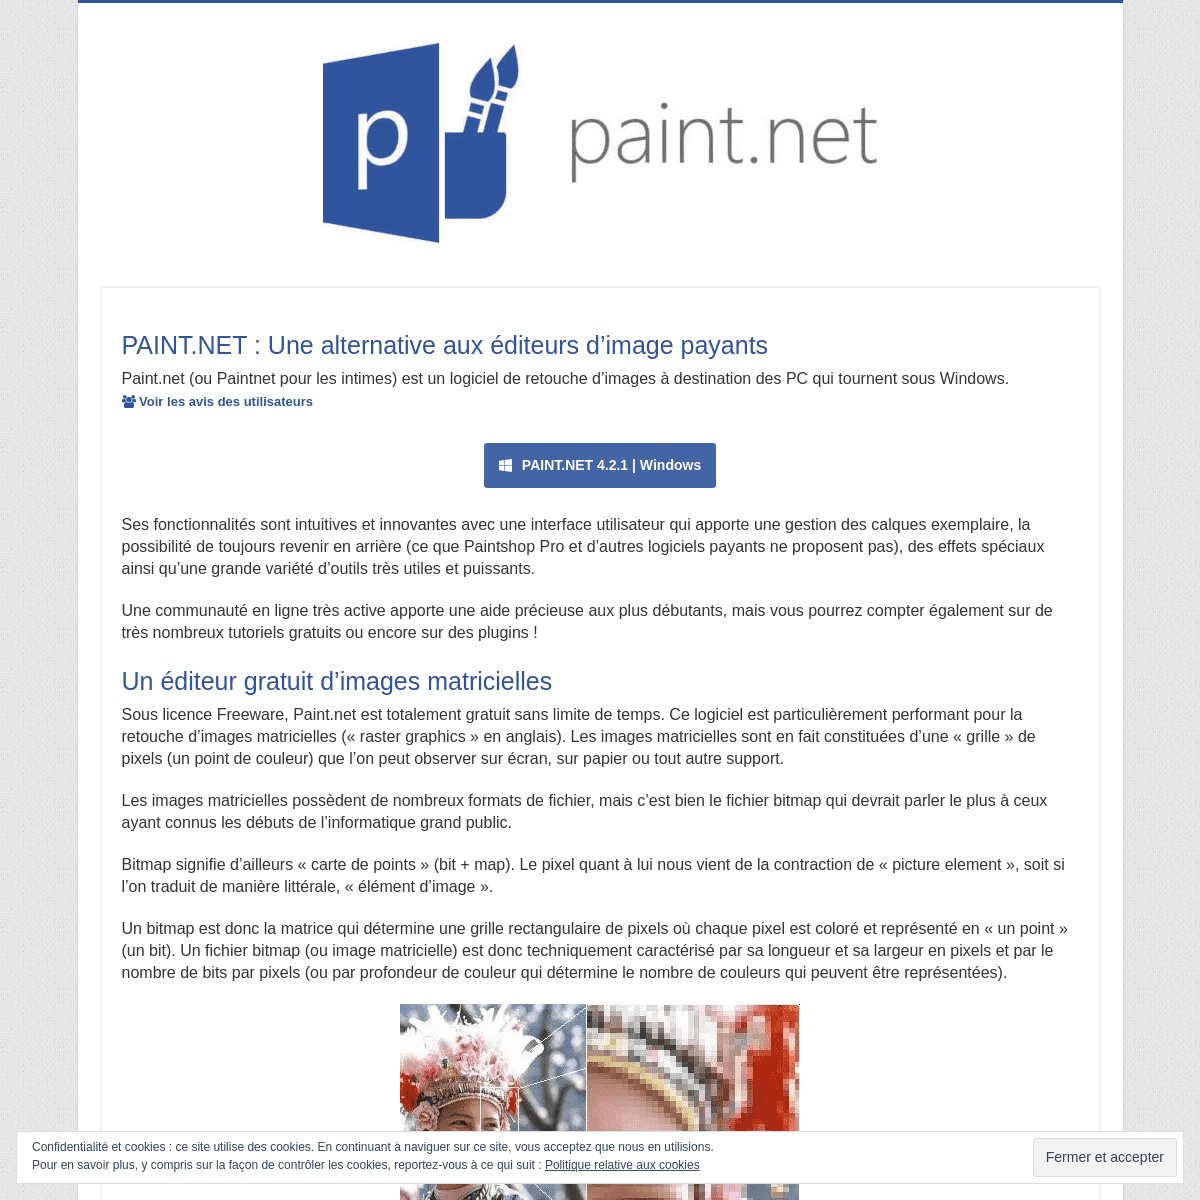 A complete backup of paintnet.fr